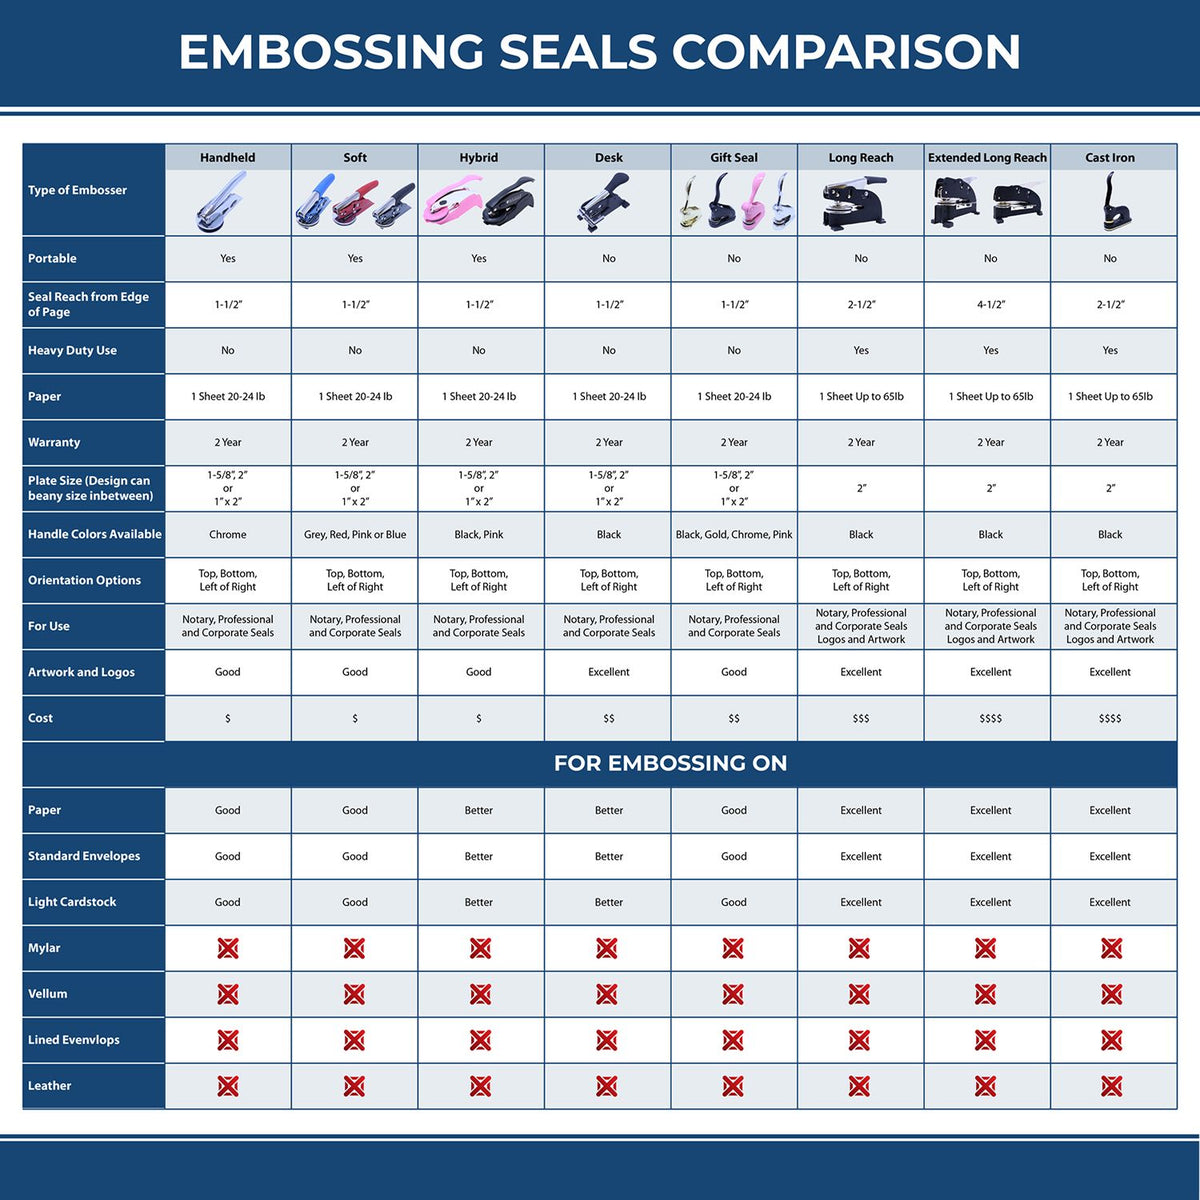 A comparison chart for the different types of mount models available for the Handheld Connecticut Land Surveyor Seal.